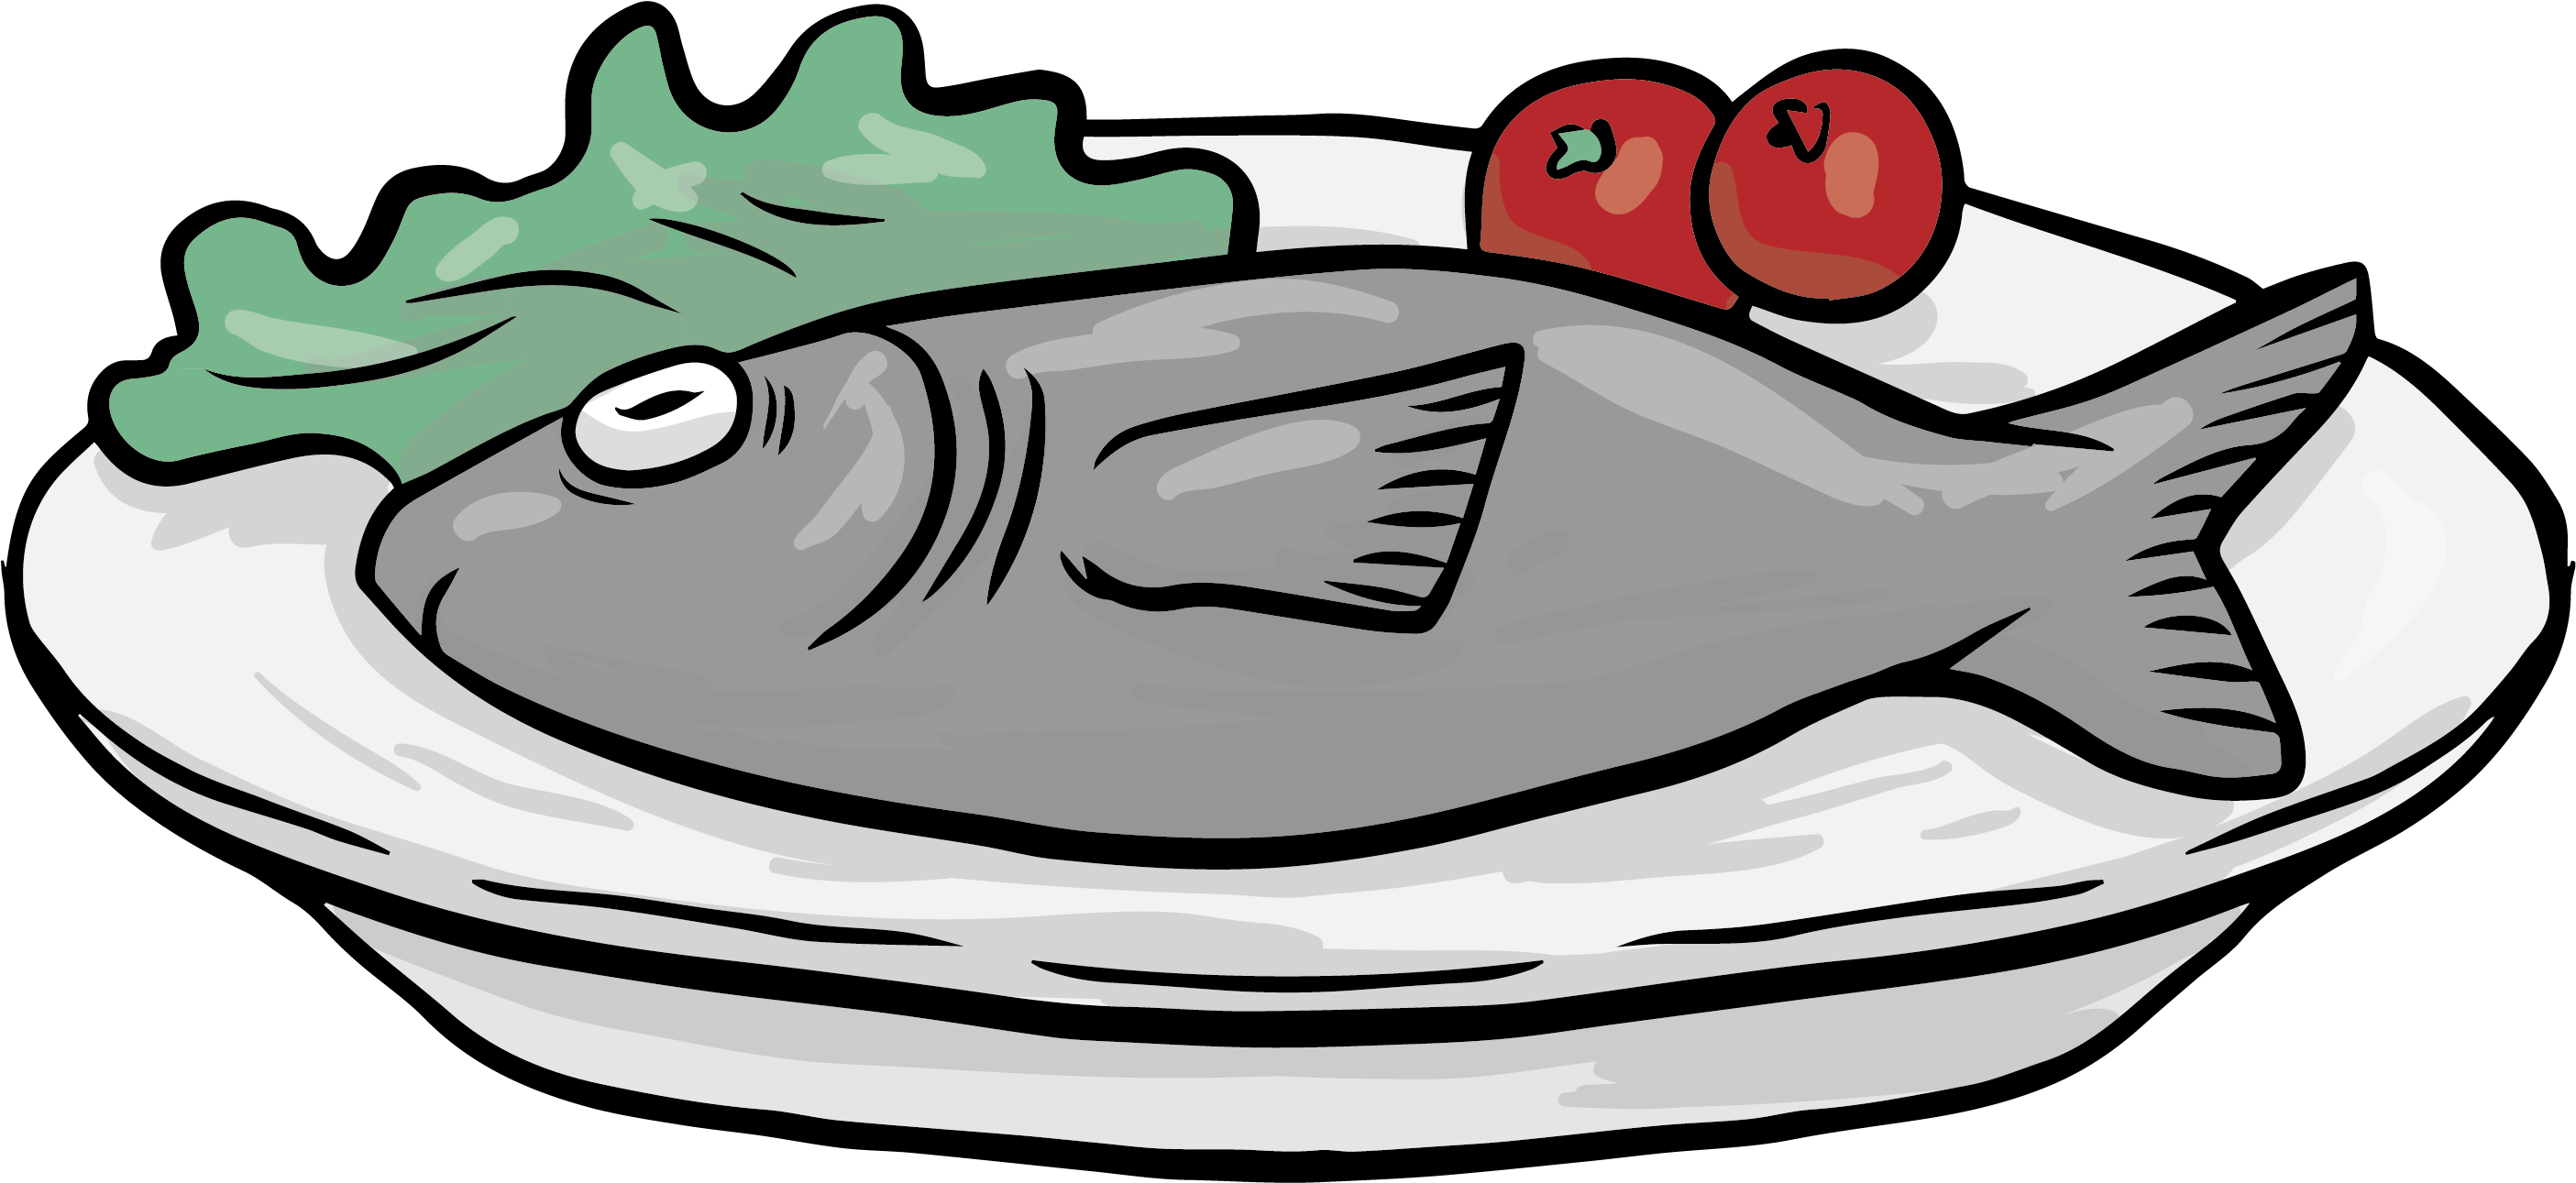 A Cartoon Of A Fish On A Plate